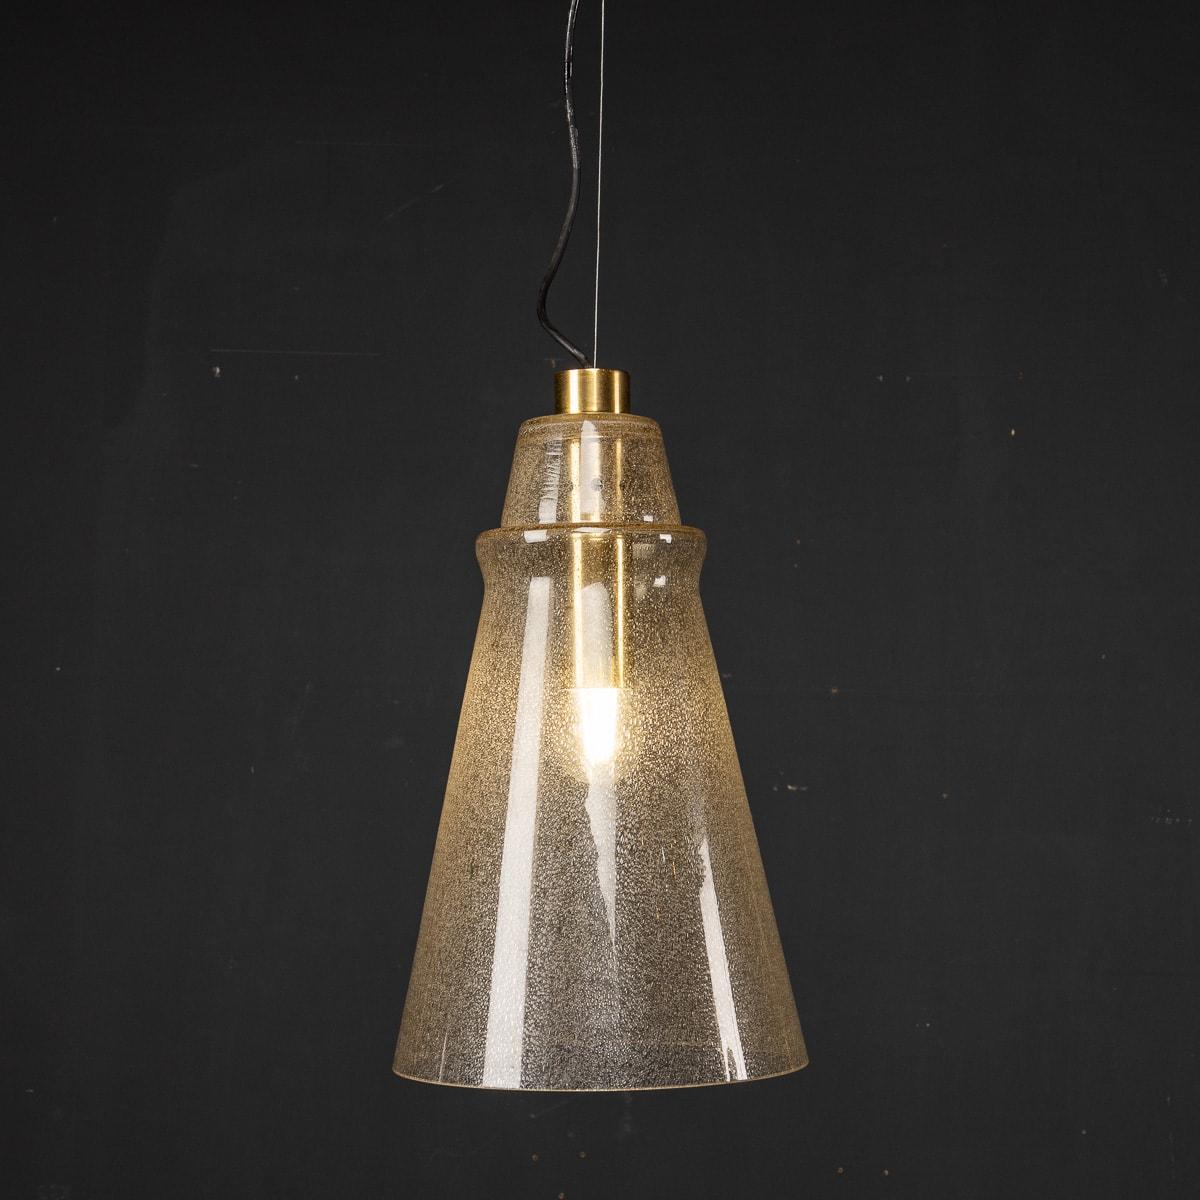 Mid 20th Century Italian Murano glass cone shaped shade pendant light with brass fittings. This light was created in the iconic 1970’s.

CONDITION
In Great Condition - wear consistent with age.

SIZE
Height: 46cm
Diameter: 27cm.